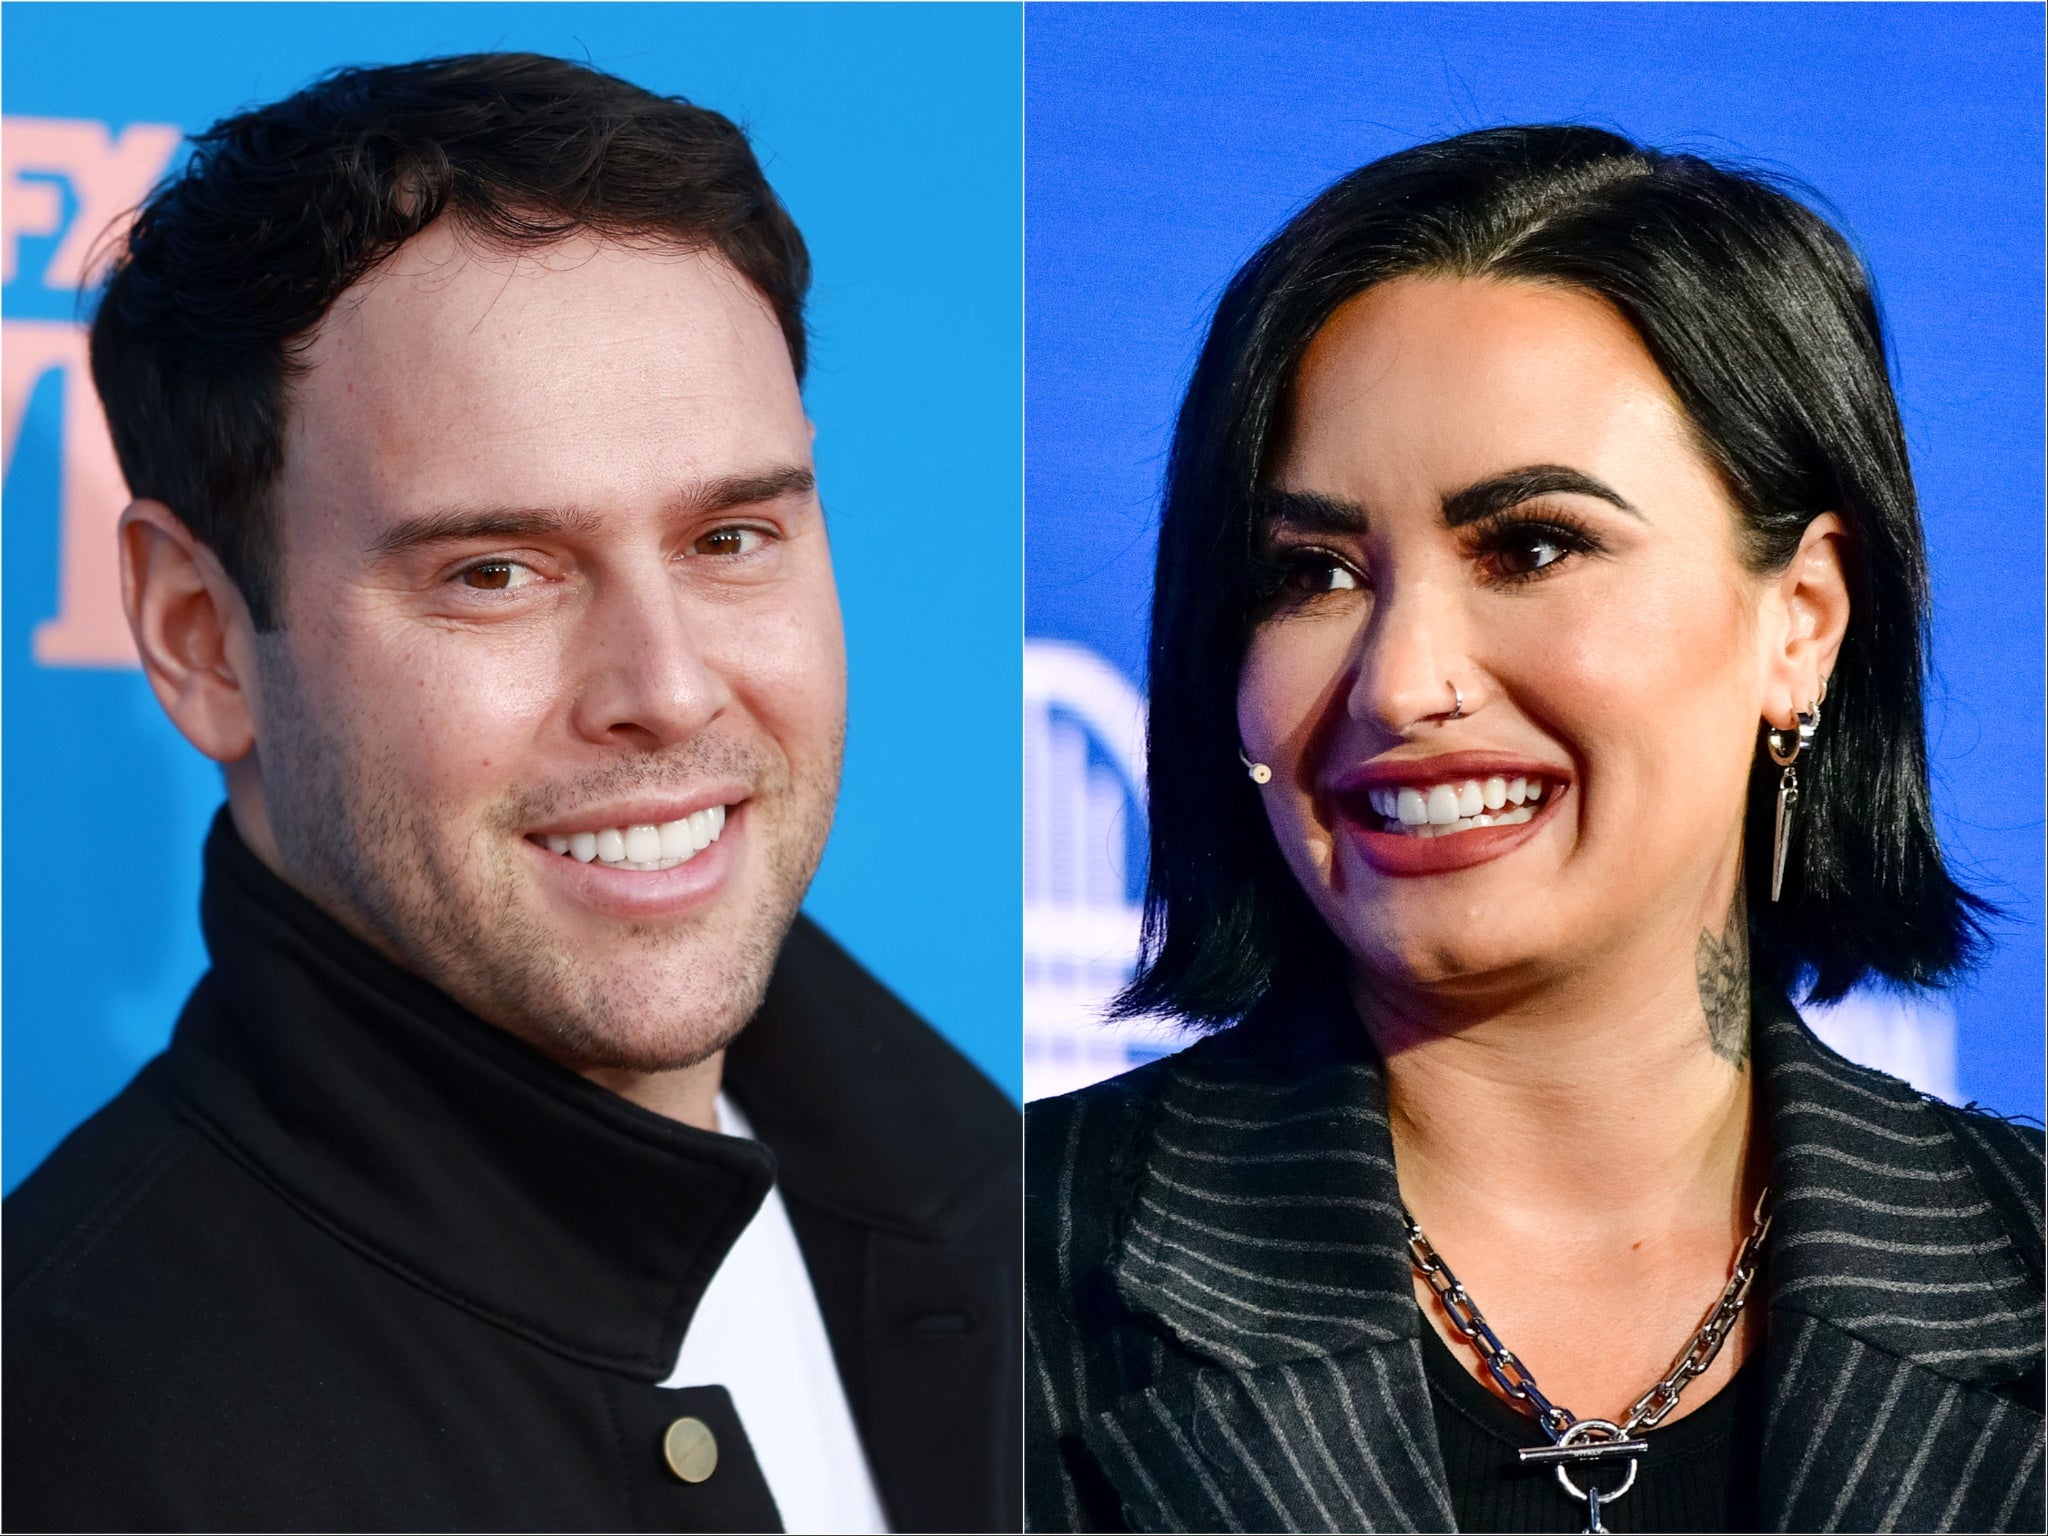 Scooter Braun (left) and Demi Lovato